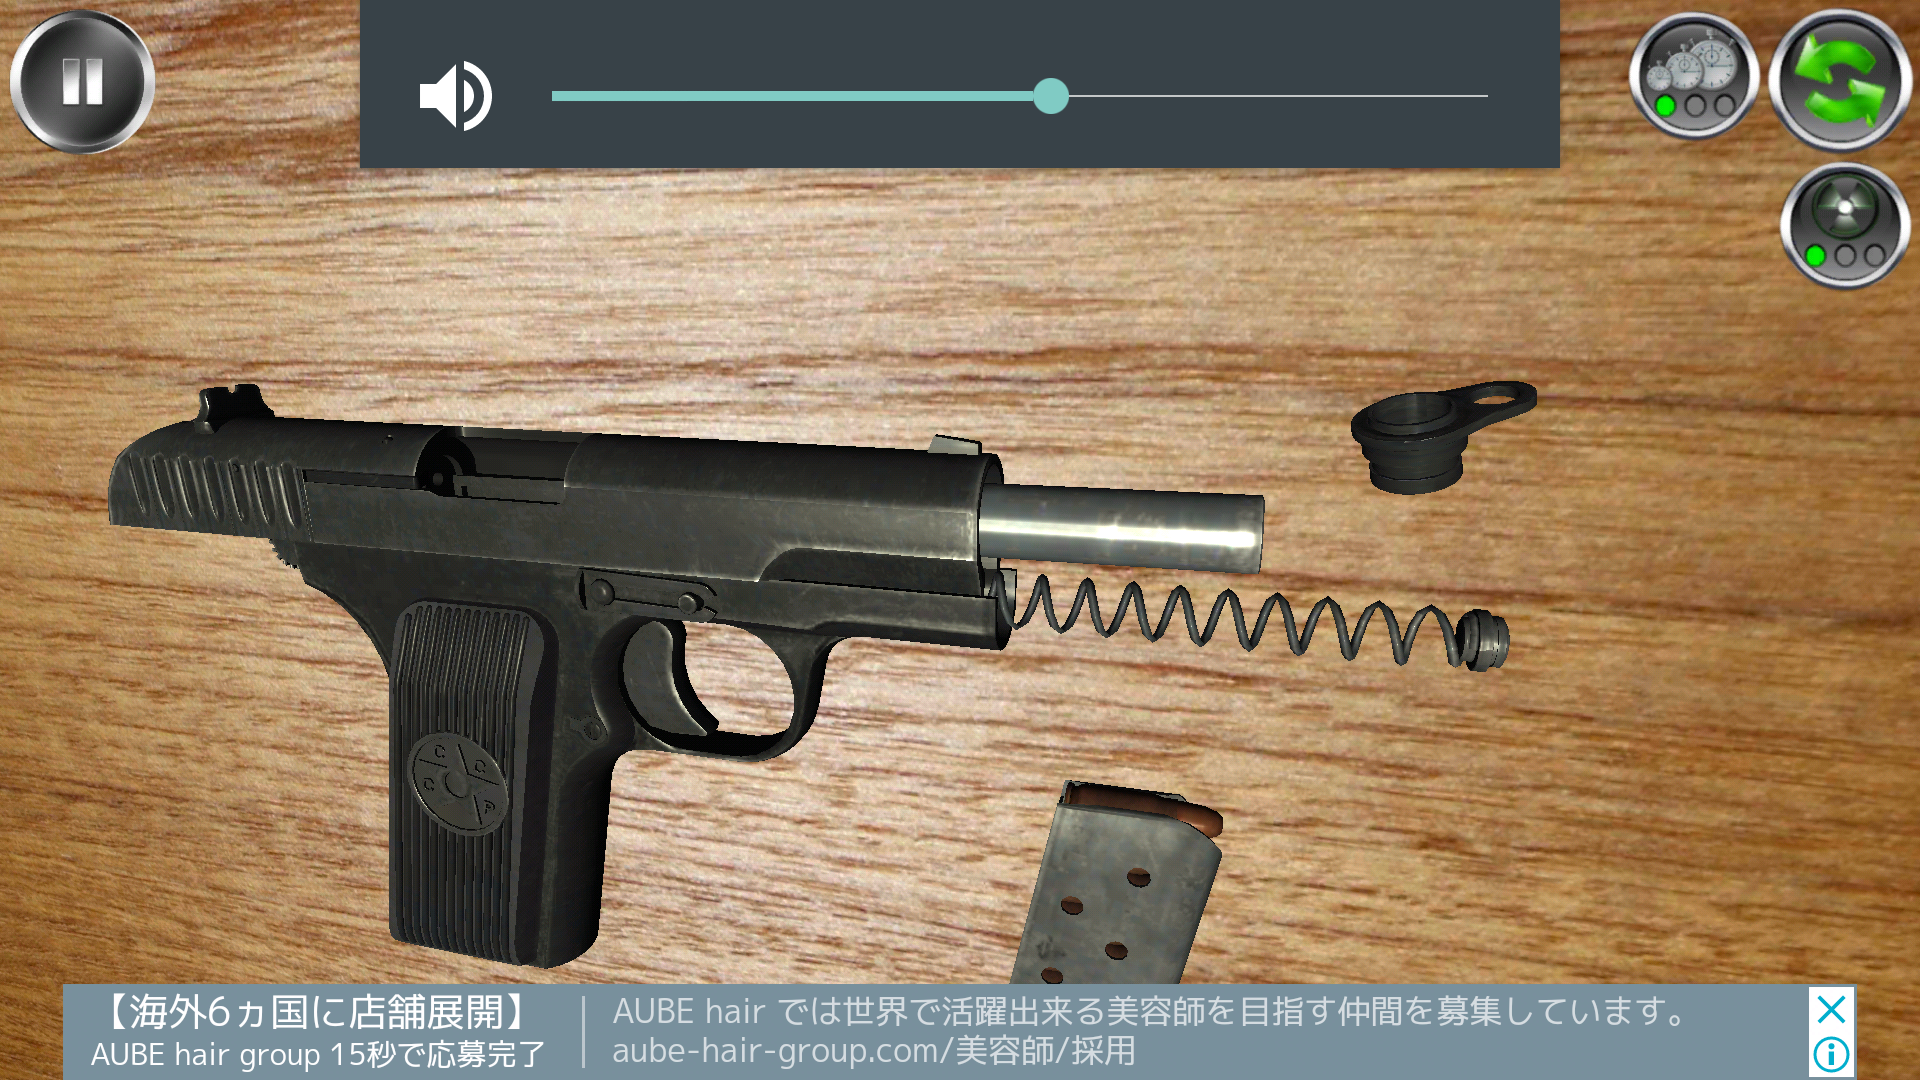 Weapon Stripping 3d 銃解体ゲーム Androidアプリ 林檎汁